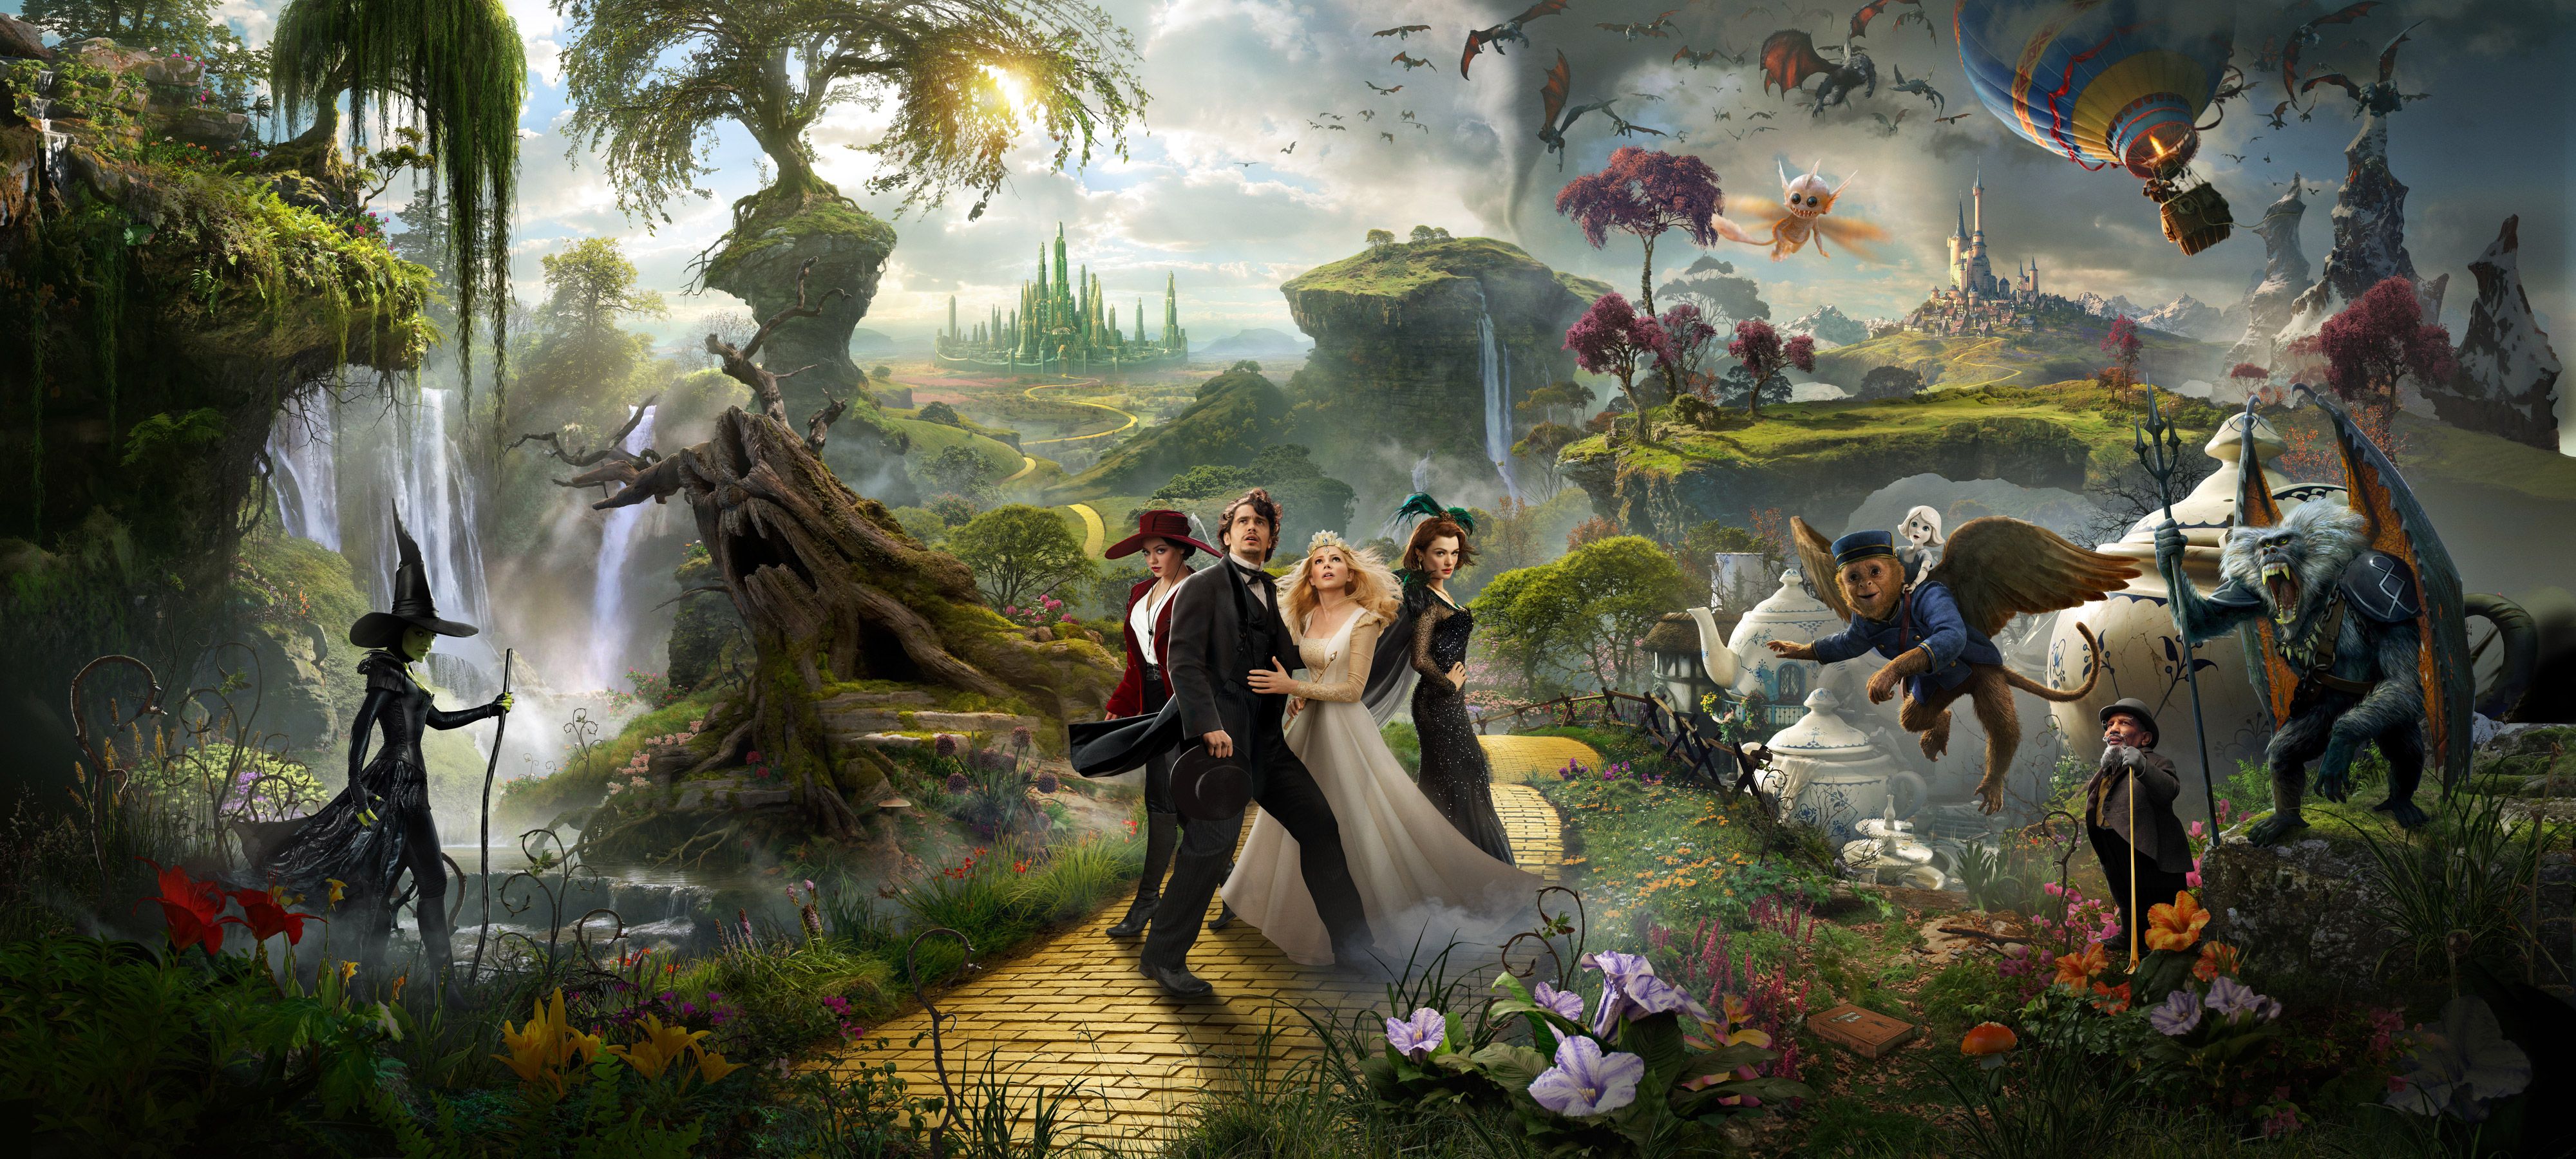 Oz The Great And Powerful Wallpaper .hdwallpaper.nu